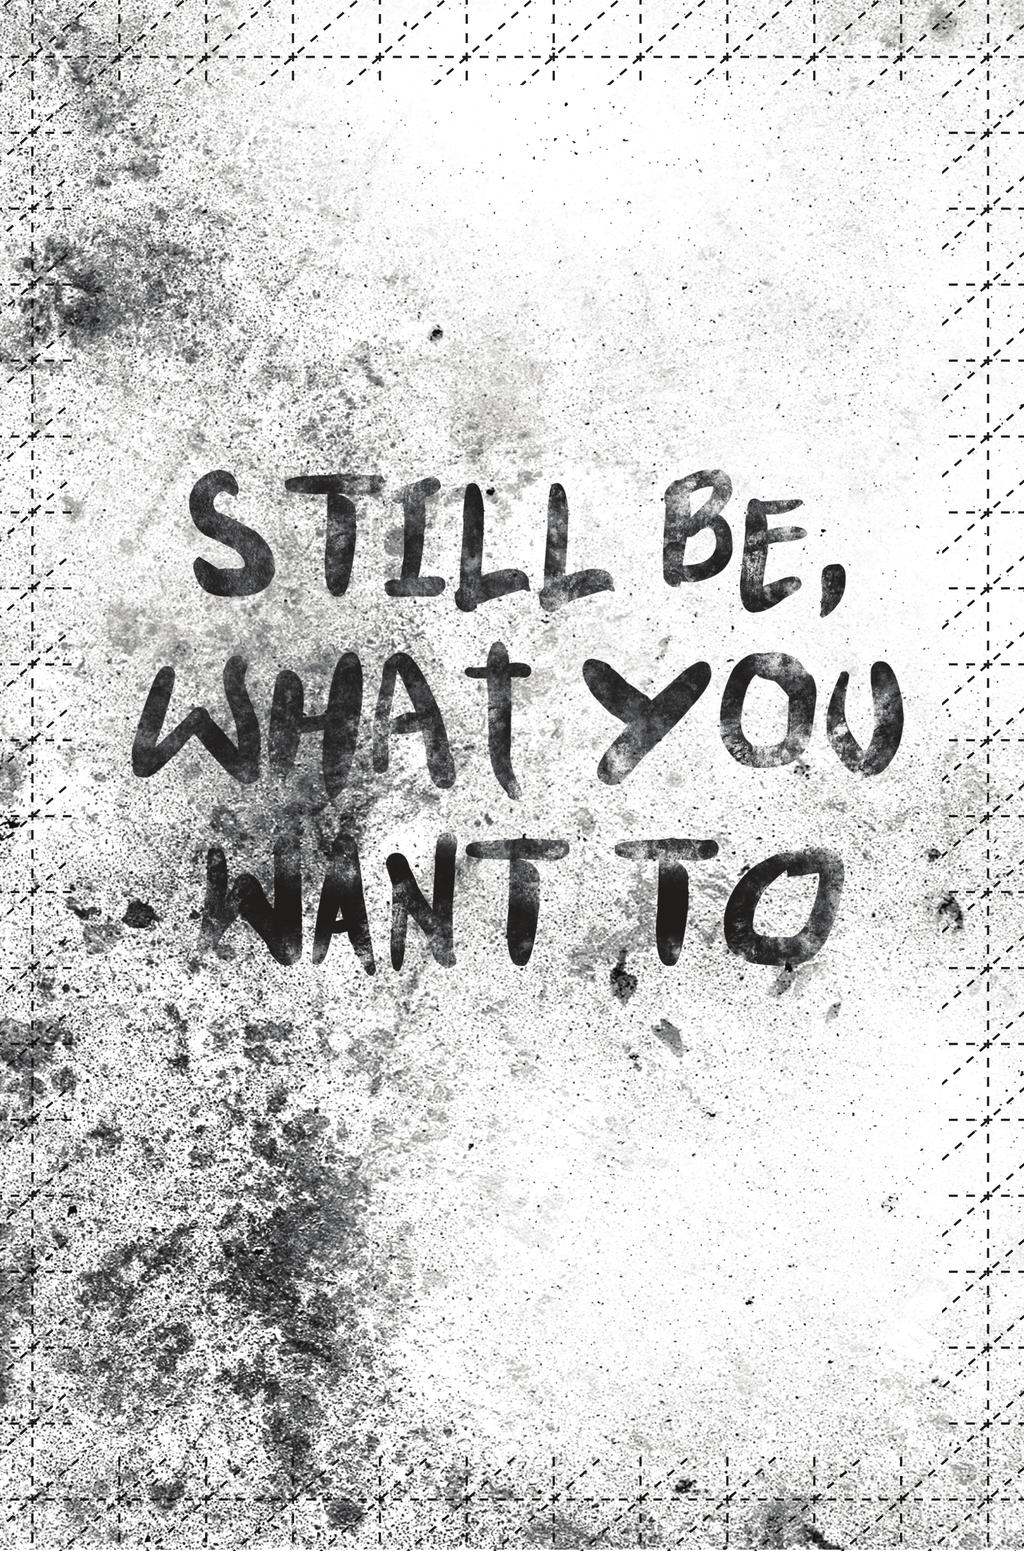 You could still be, what you want to.